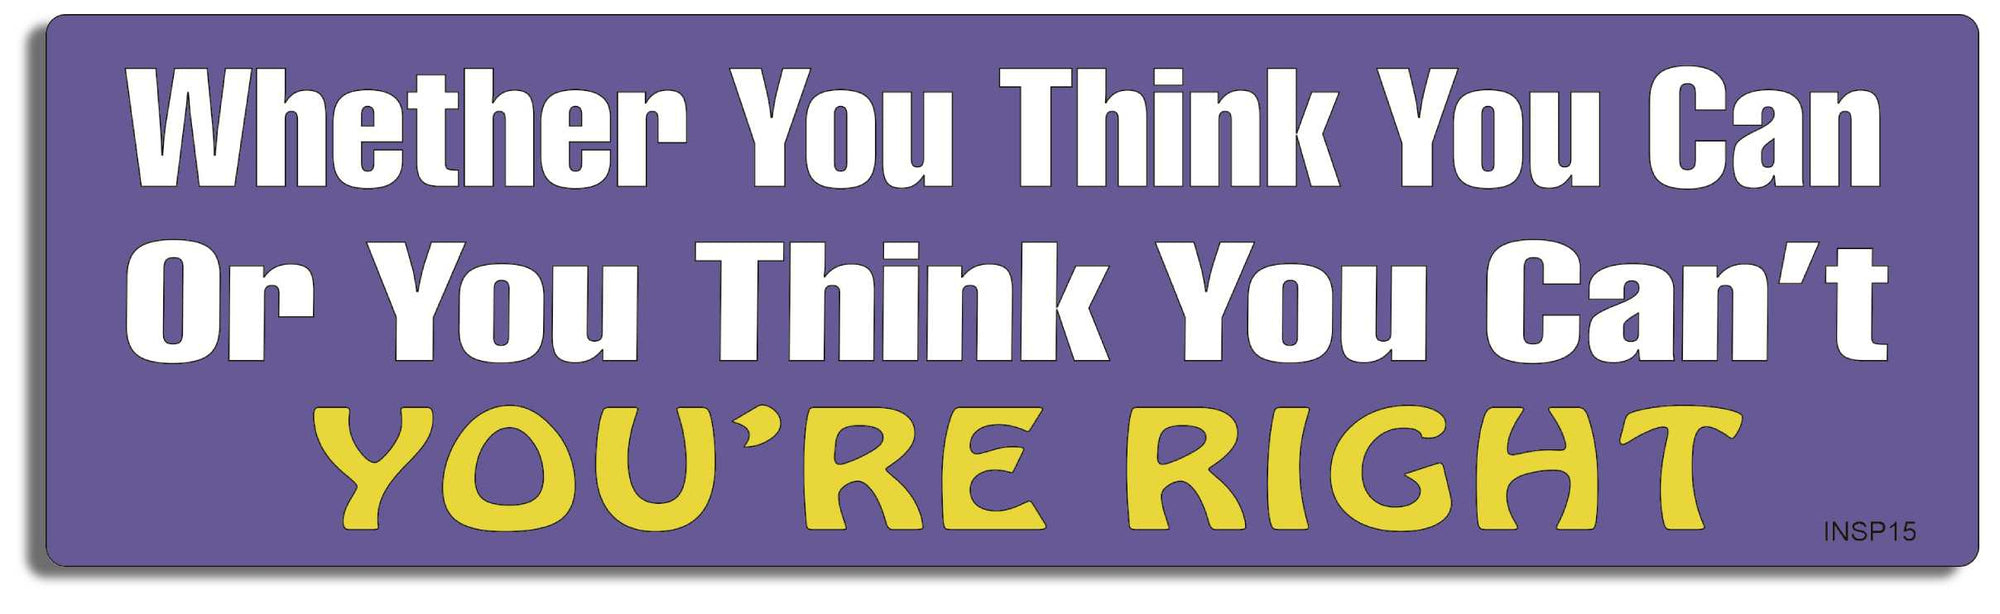 Whether You Think You Can Or You Think You Can't You're Right - 3" x 10" -  Decal Bumper Sticker-quotation Bumper Sticker Car Magnet Whether You Think You Can Or You-  Decal for carsKindness